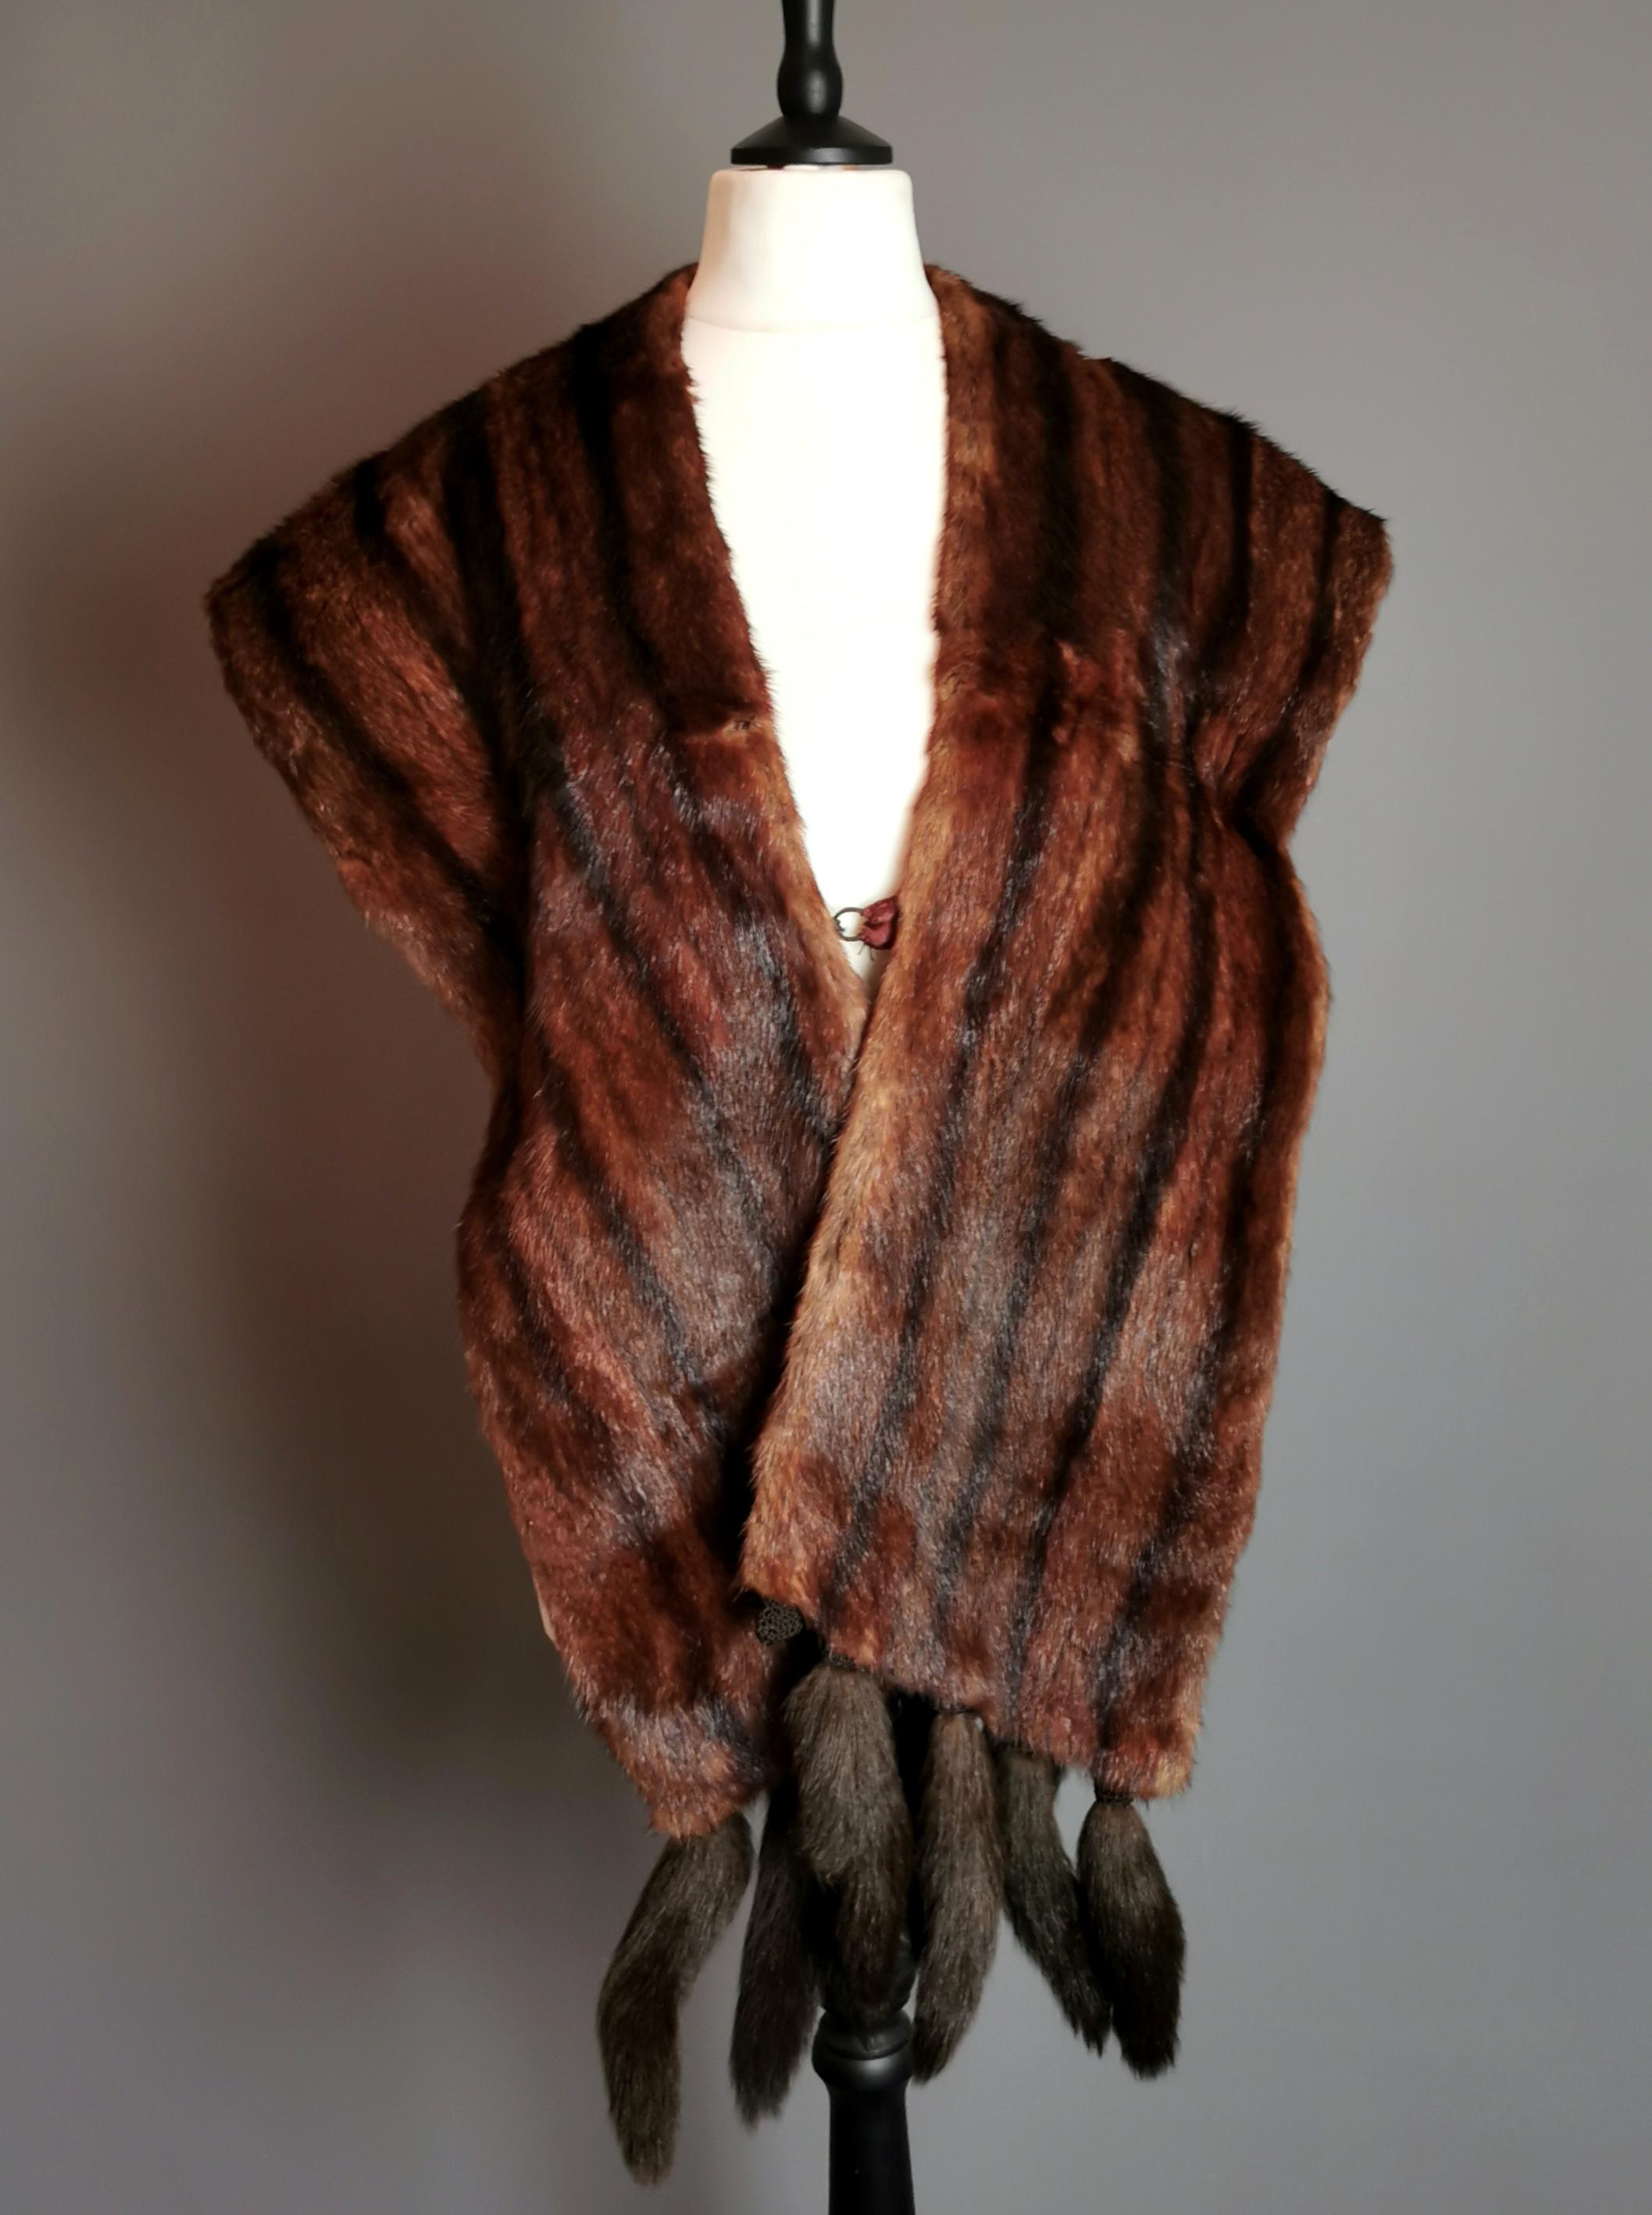 A beautiful vintage c1950s soft real mink fur stole.

It is a large and luxurious stole, made with high quality super soft mink fur in mahogany brown with black stripes, the stole has tails, one is missing.

The stole is lined in a rich rust